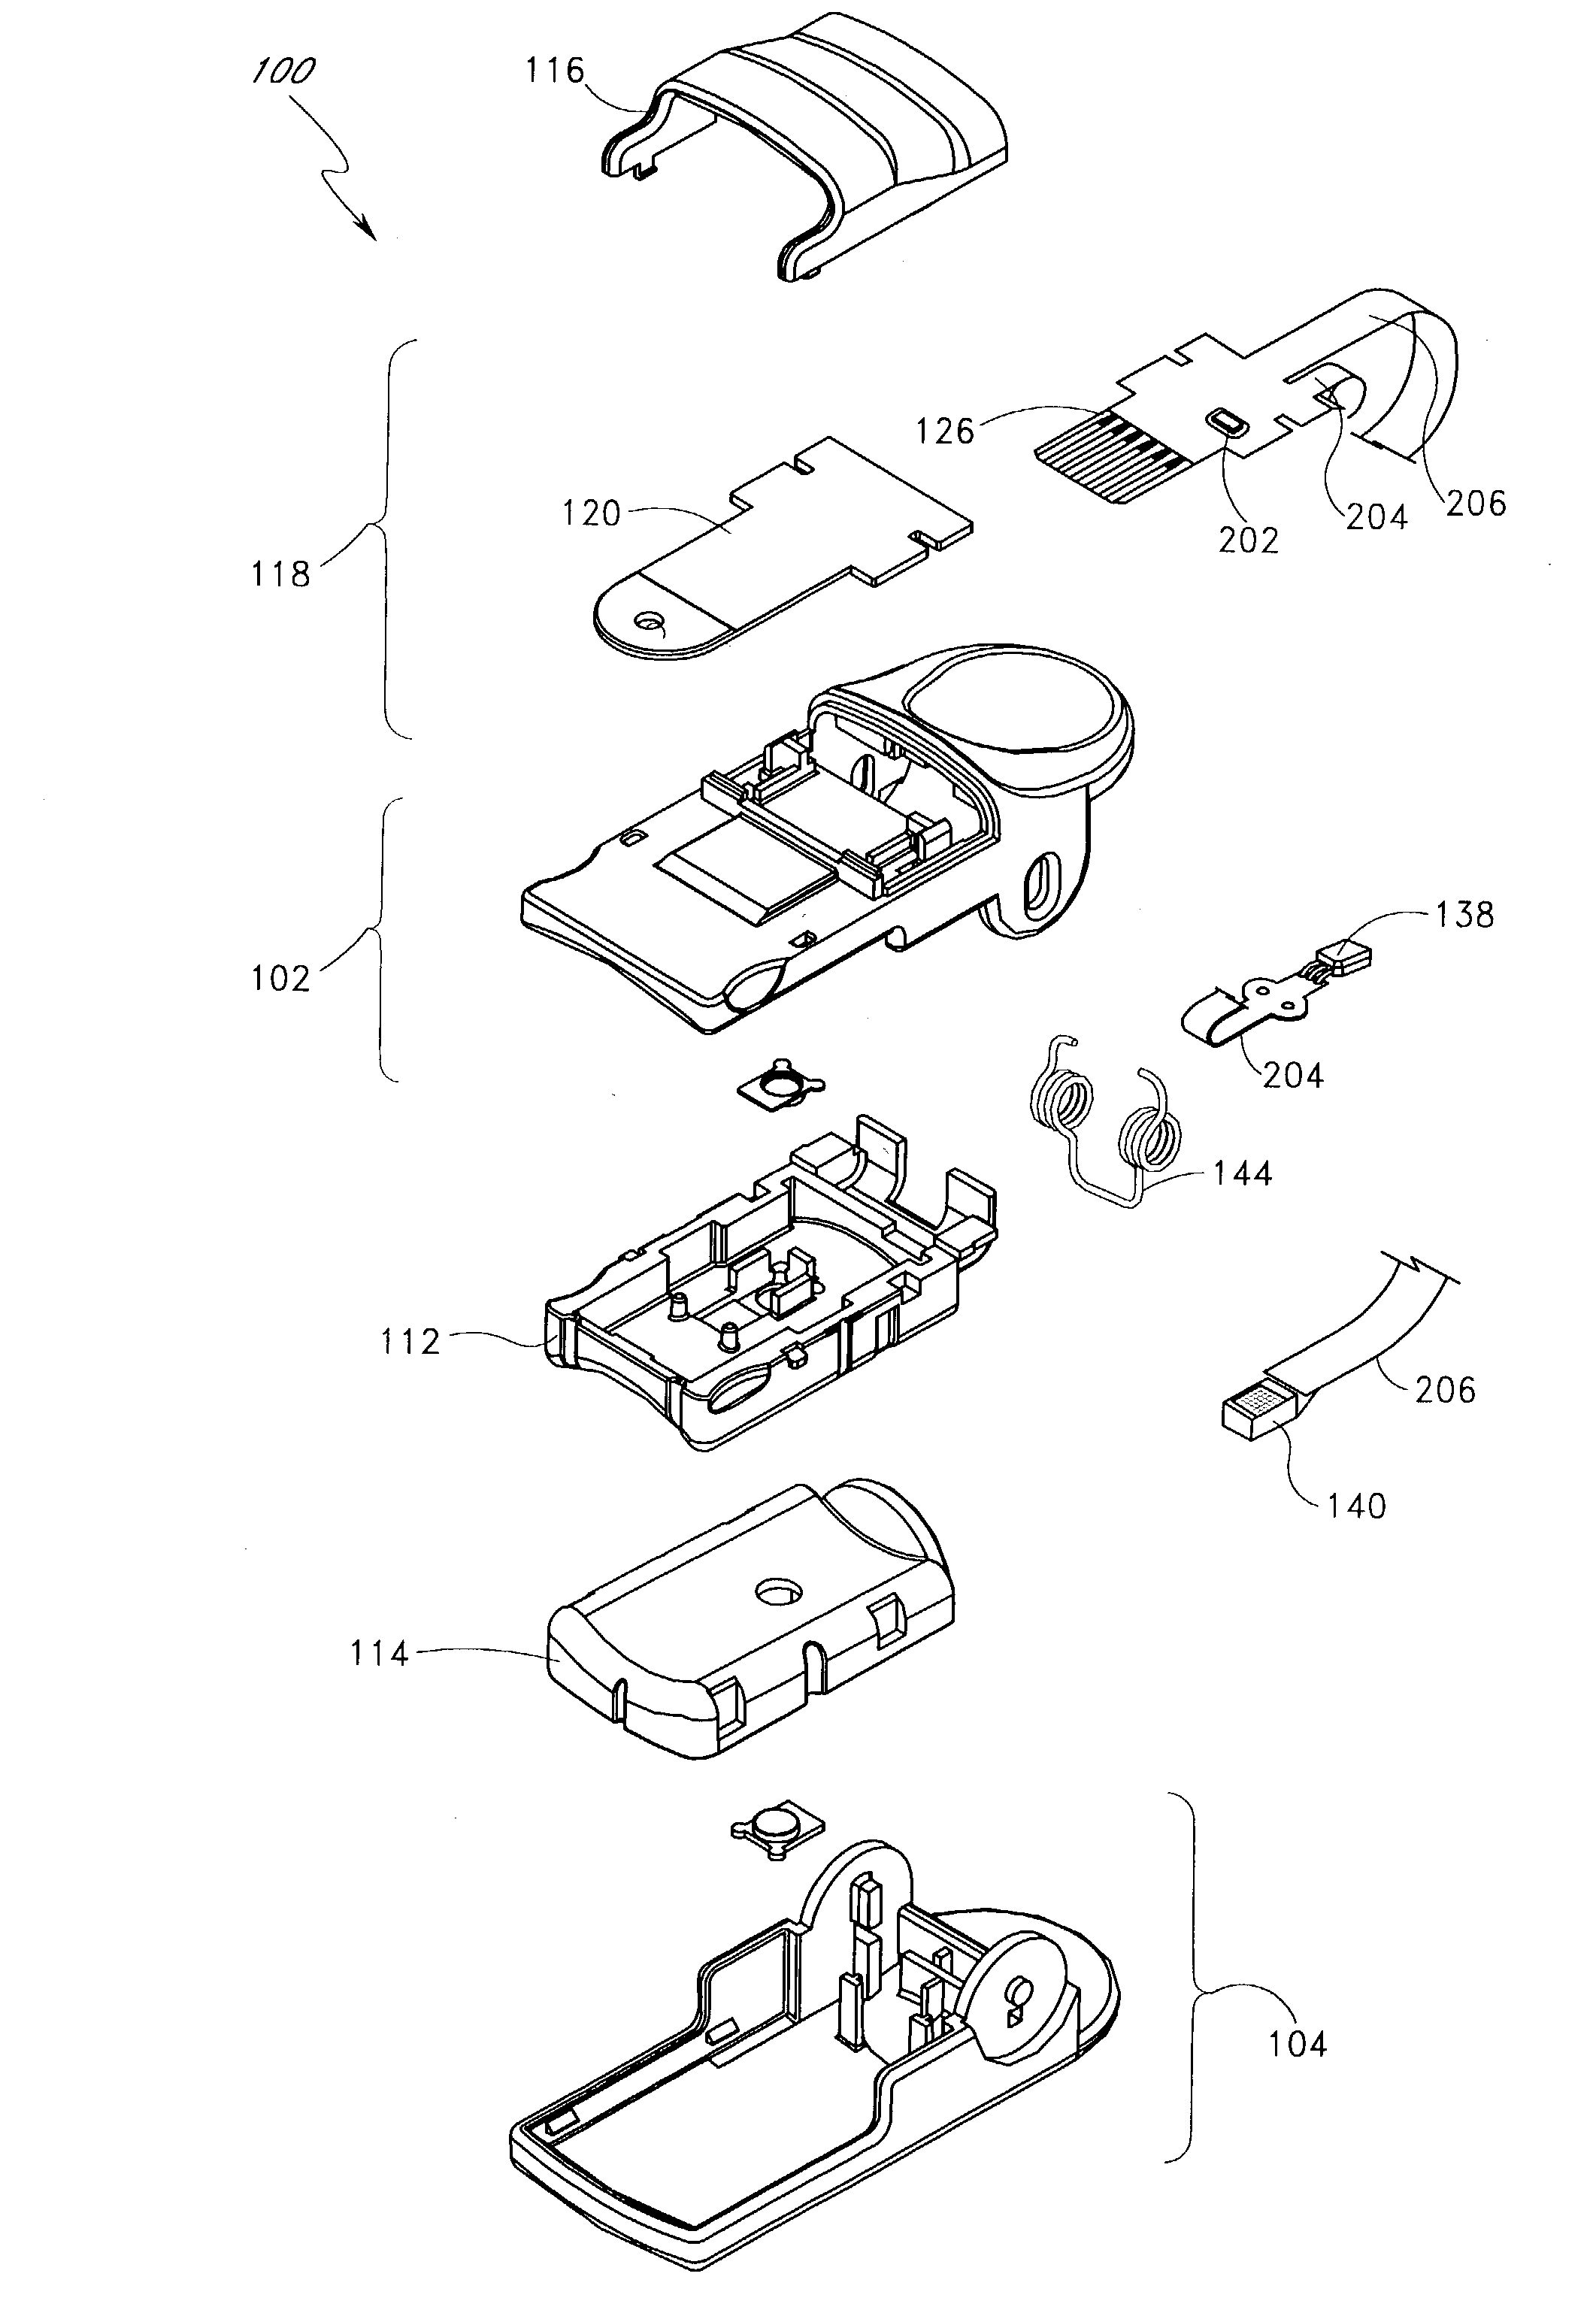 Shielded optical probe having an electrical connector